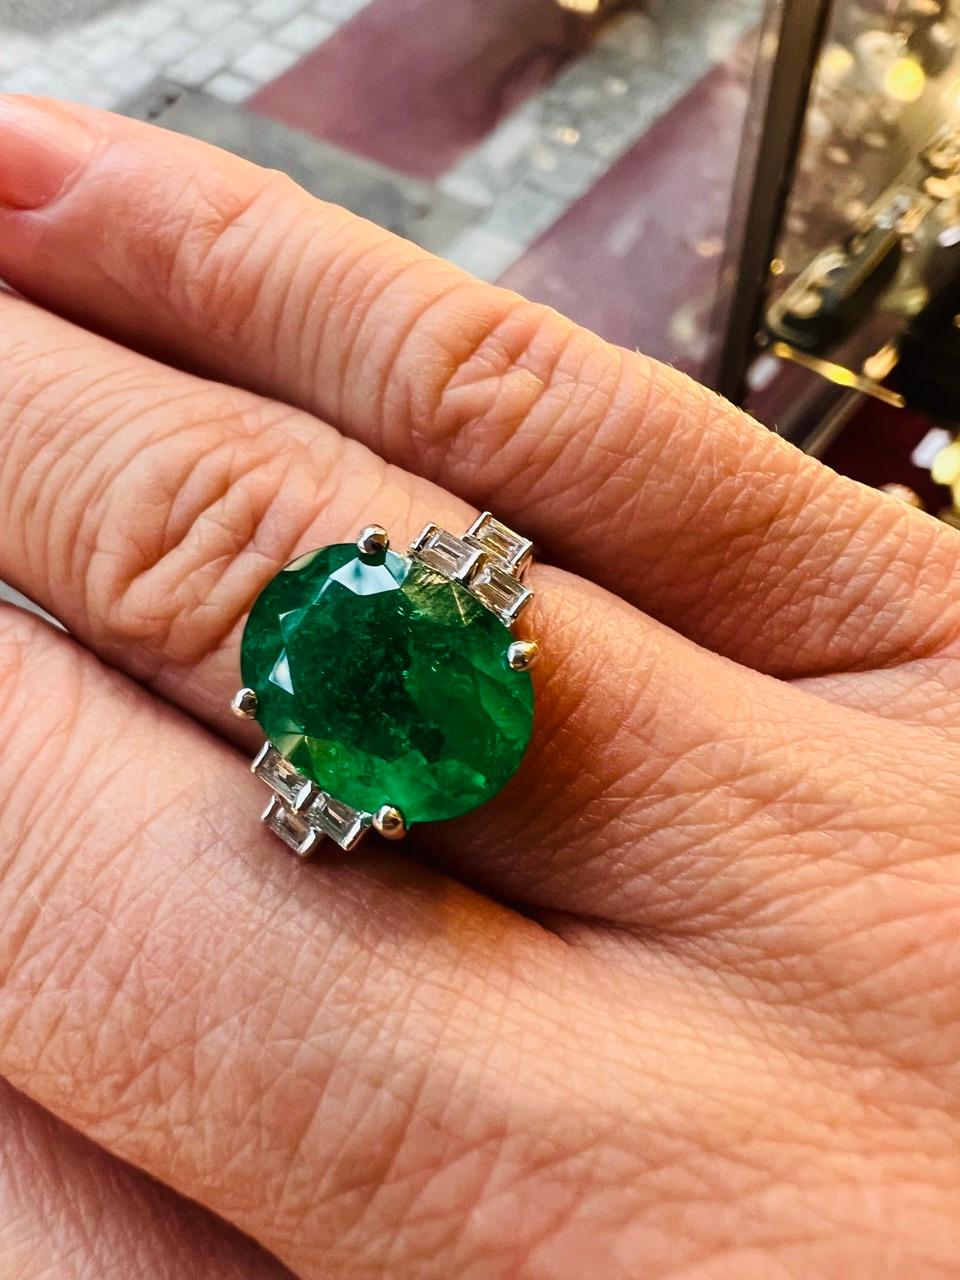 Columbia Emerald of 4.73 carat surrounded by baguette-cut diamonds for 0.12 carat
this ring in 18 carat white gold weighs in total: 4.30 grams
ring size 53